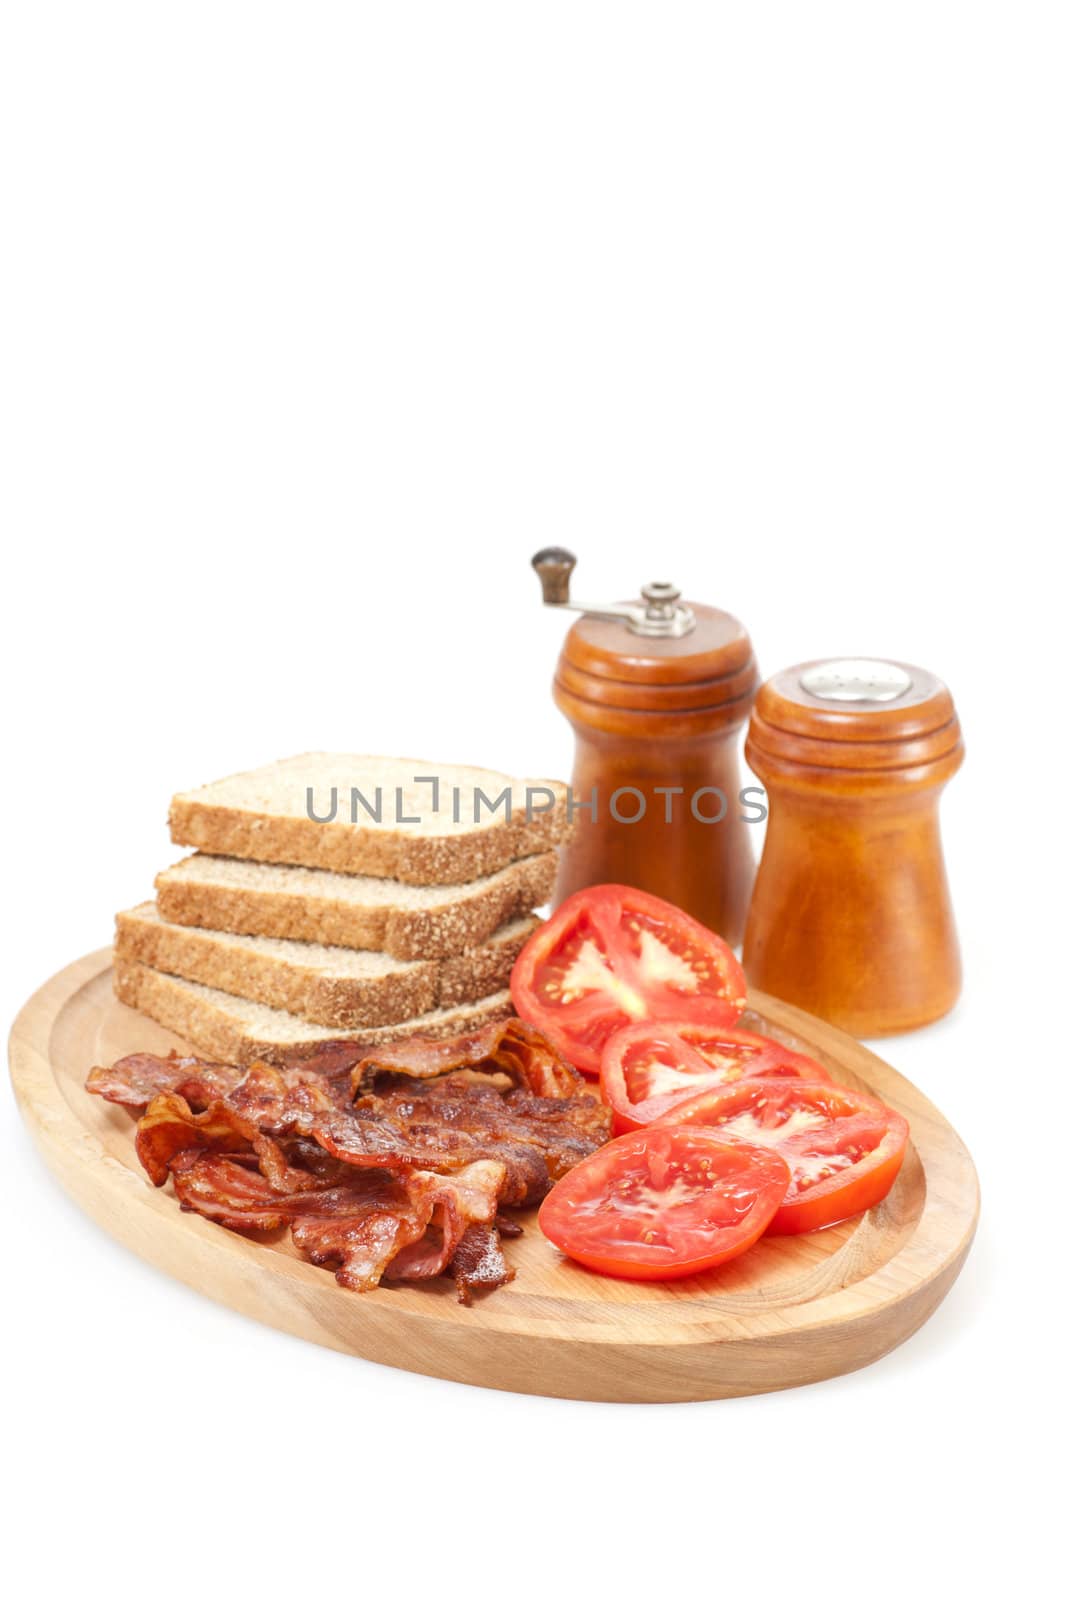 Platter of cooked bacon and fresh tomatoes on a white background.